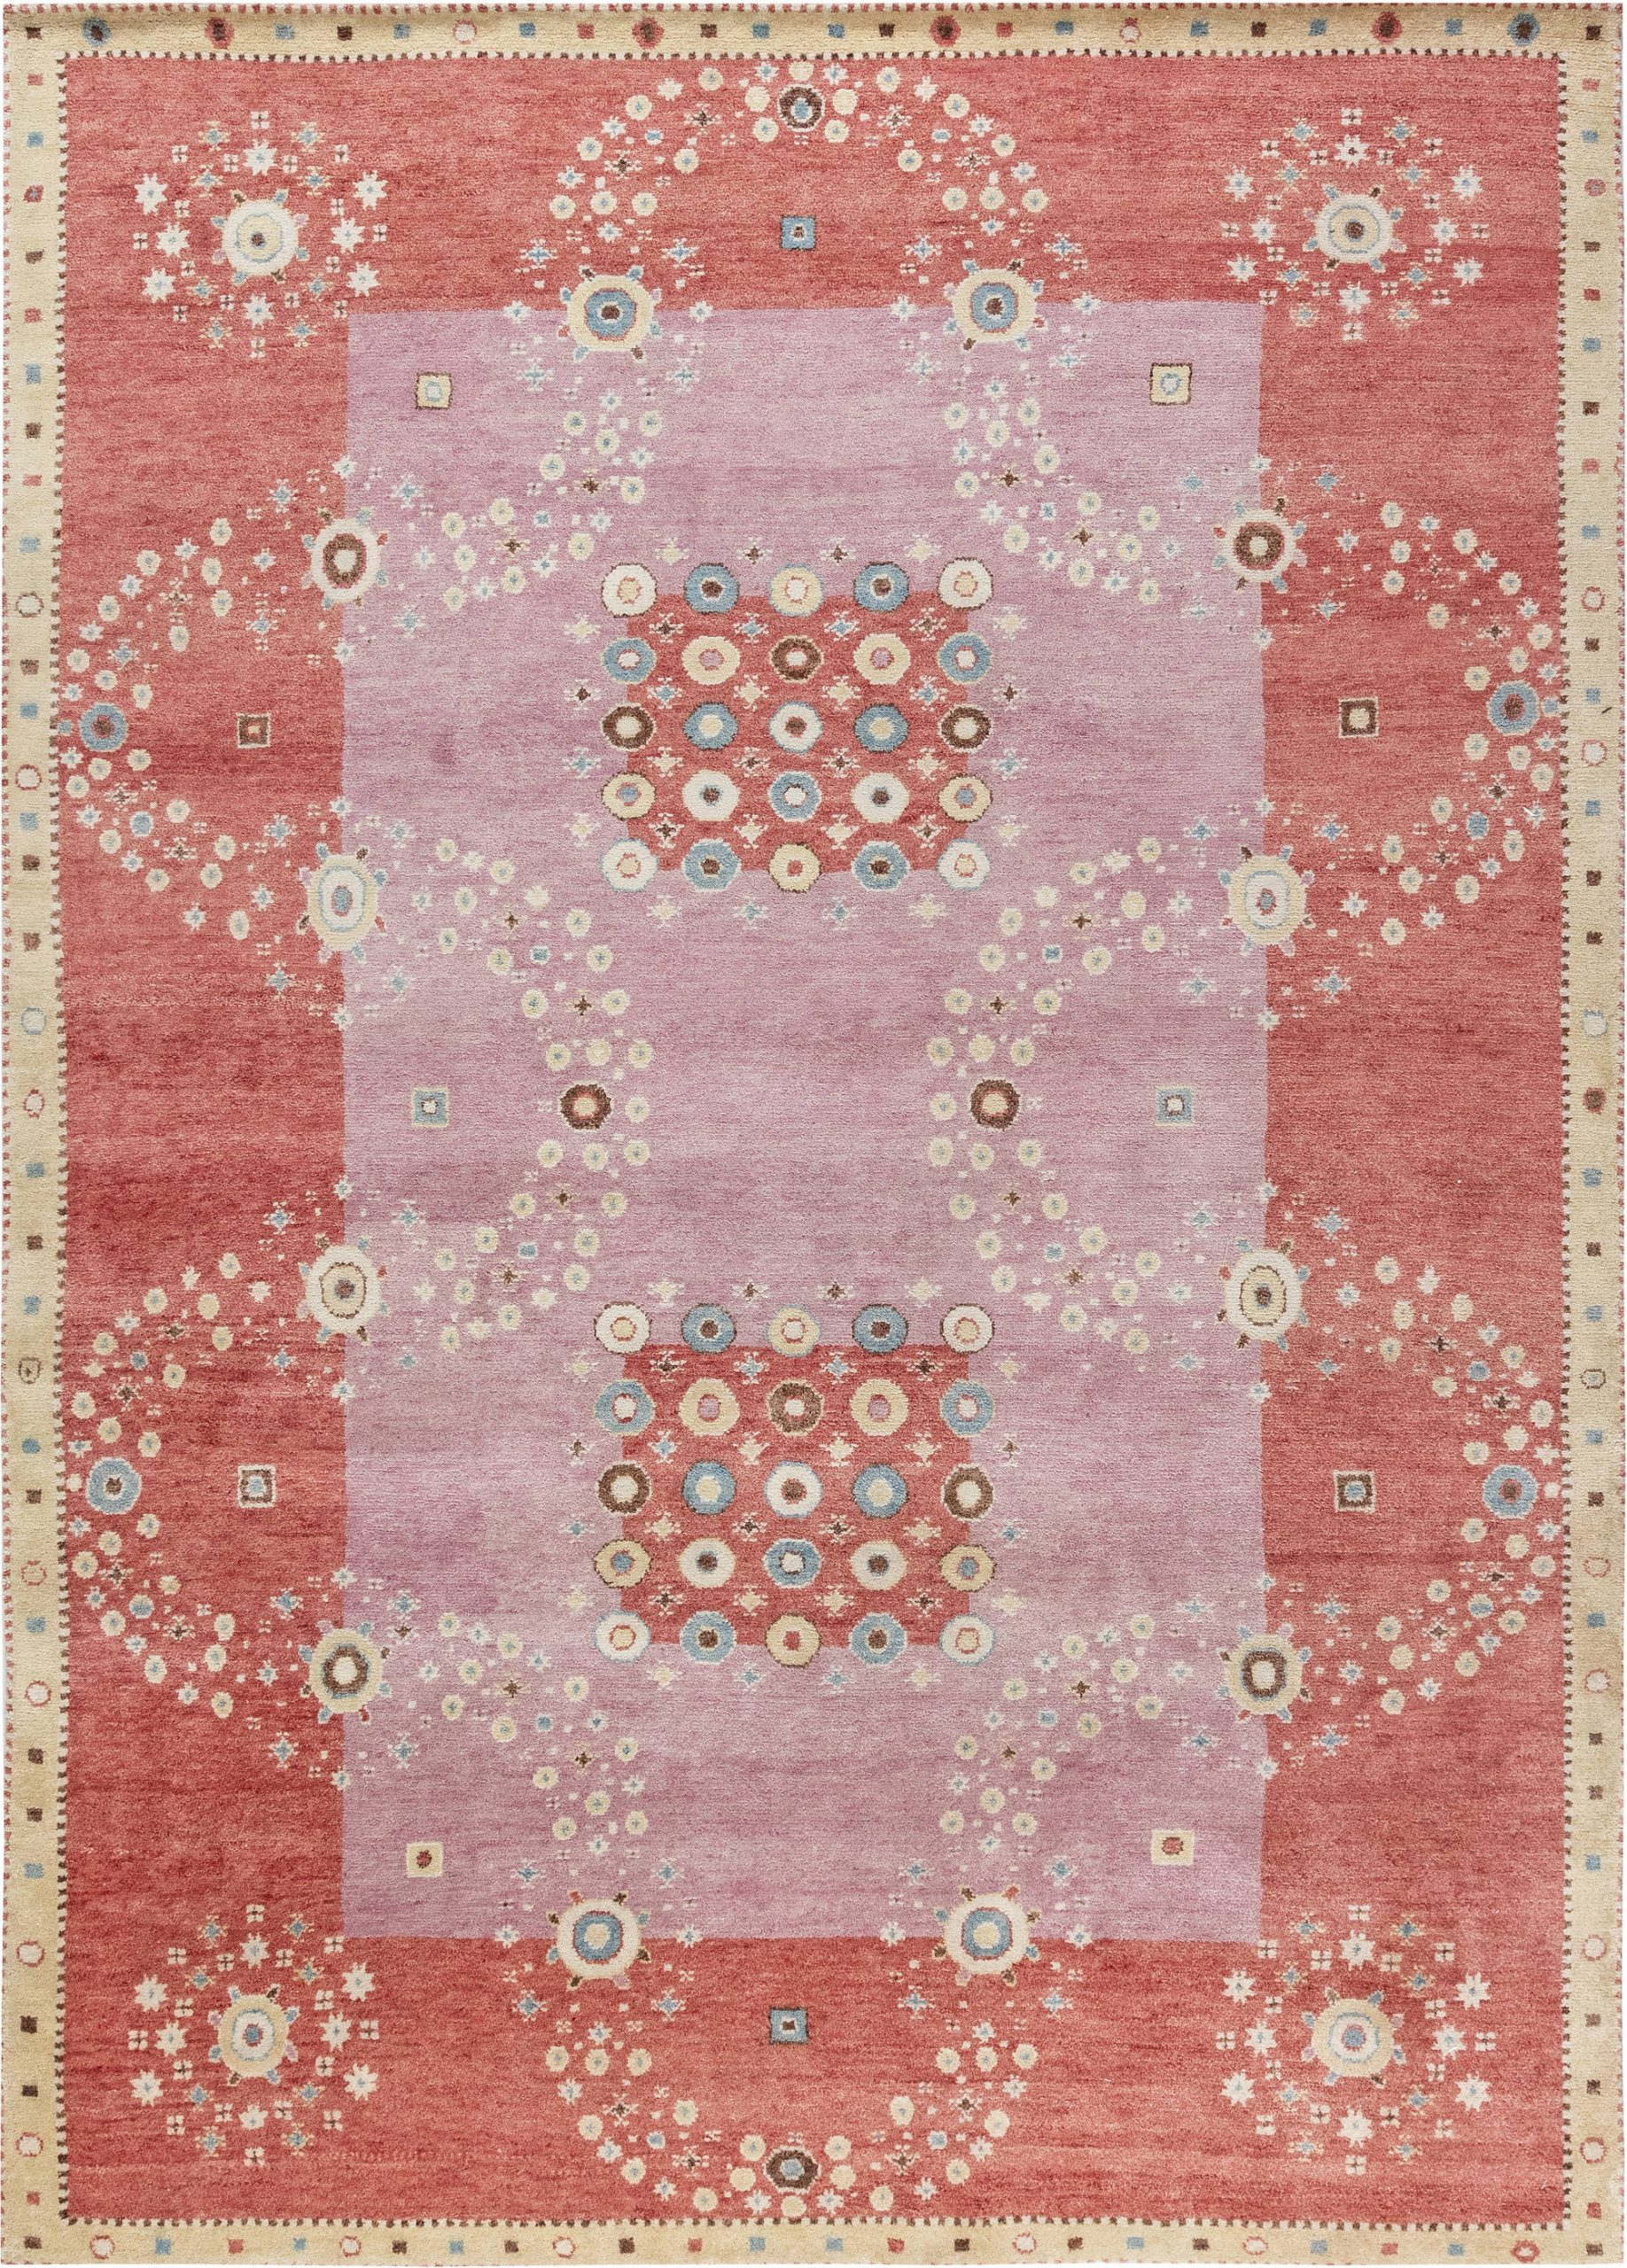 Contemporary Swedish Design Red, <mark class='searchwp-highlight'>Pink</mark> & Beige Wool Rug N12032